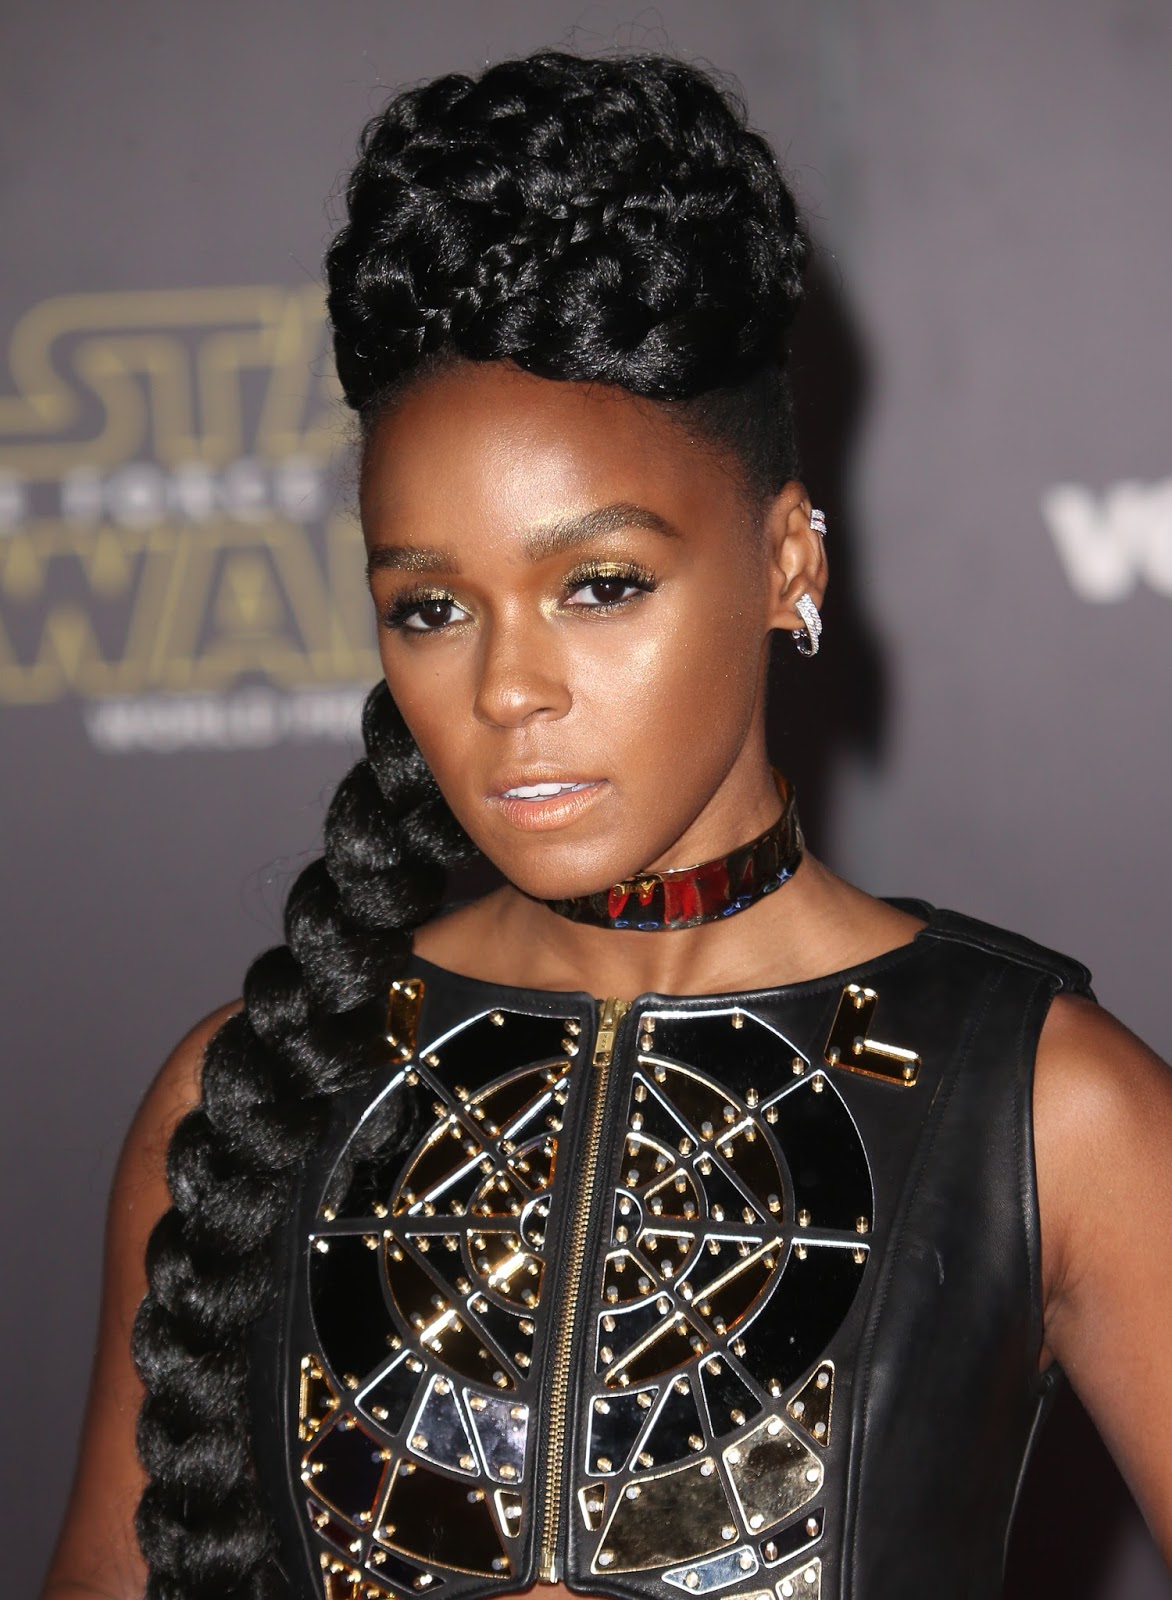 Actress, Singer, @ Janelle Monae - Star Wars: The Force Awakens Premiere in Hollywood ...1172 x 1600